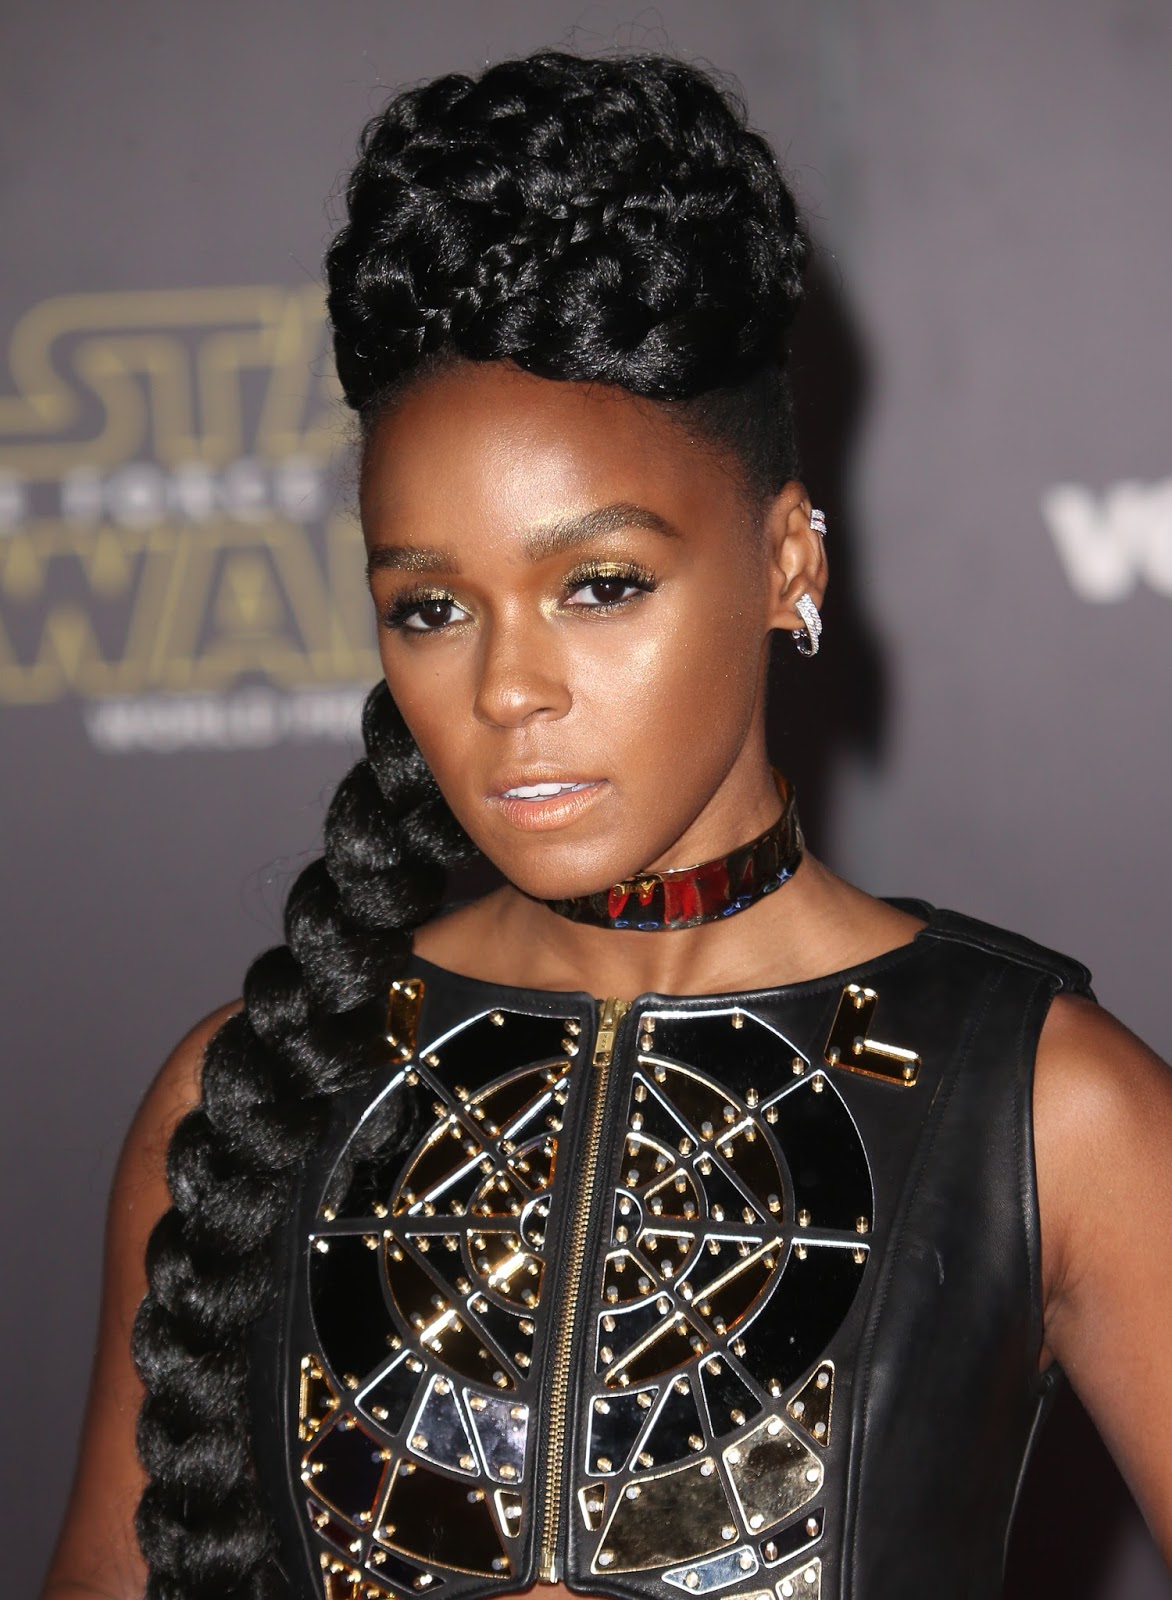 Actress, Singer, @ Janelle Monae - Star Wars: The Force Awakens Premiere in Hollywood ...1172 x 1600